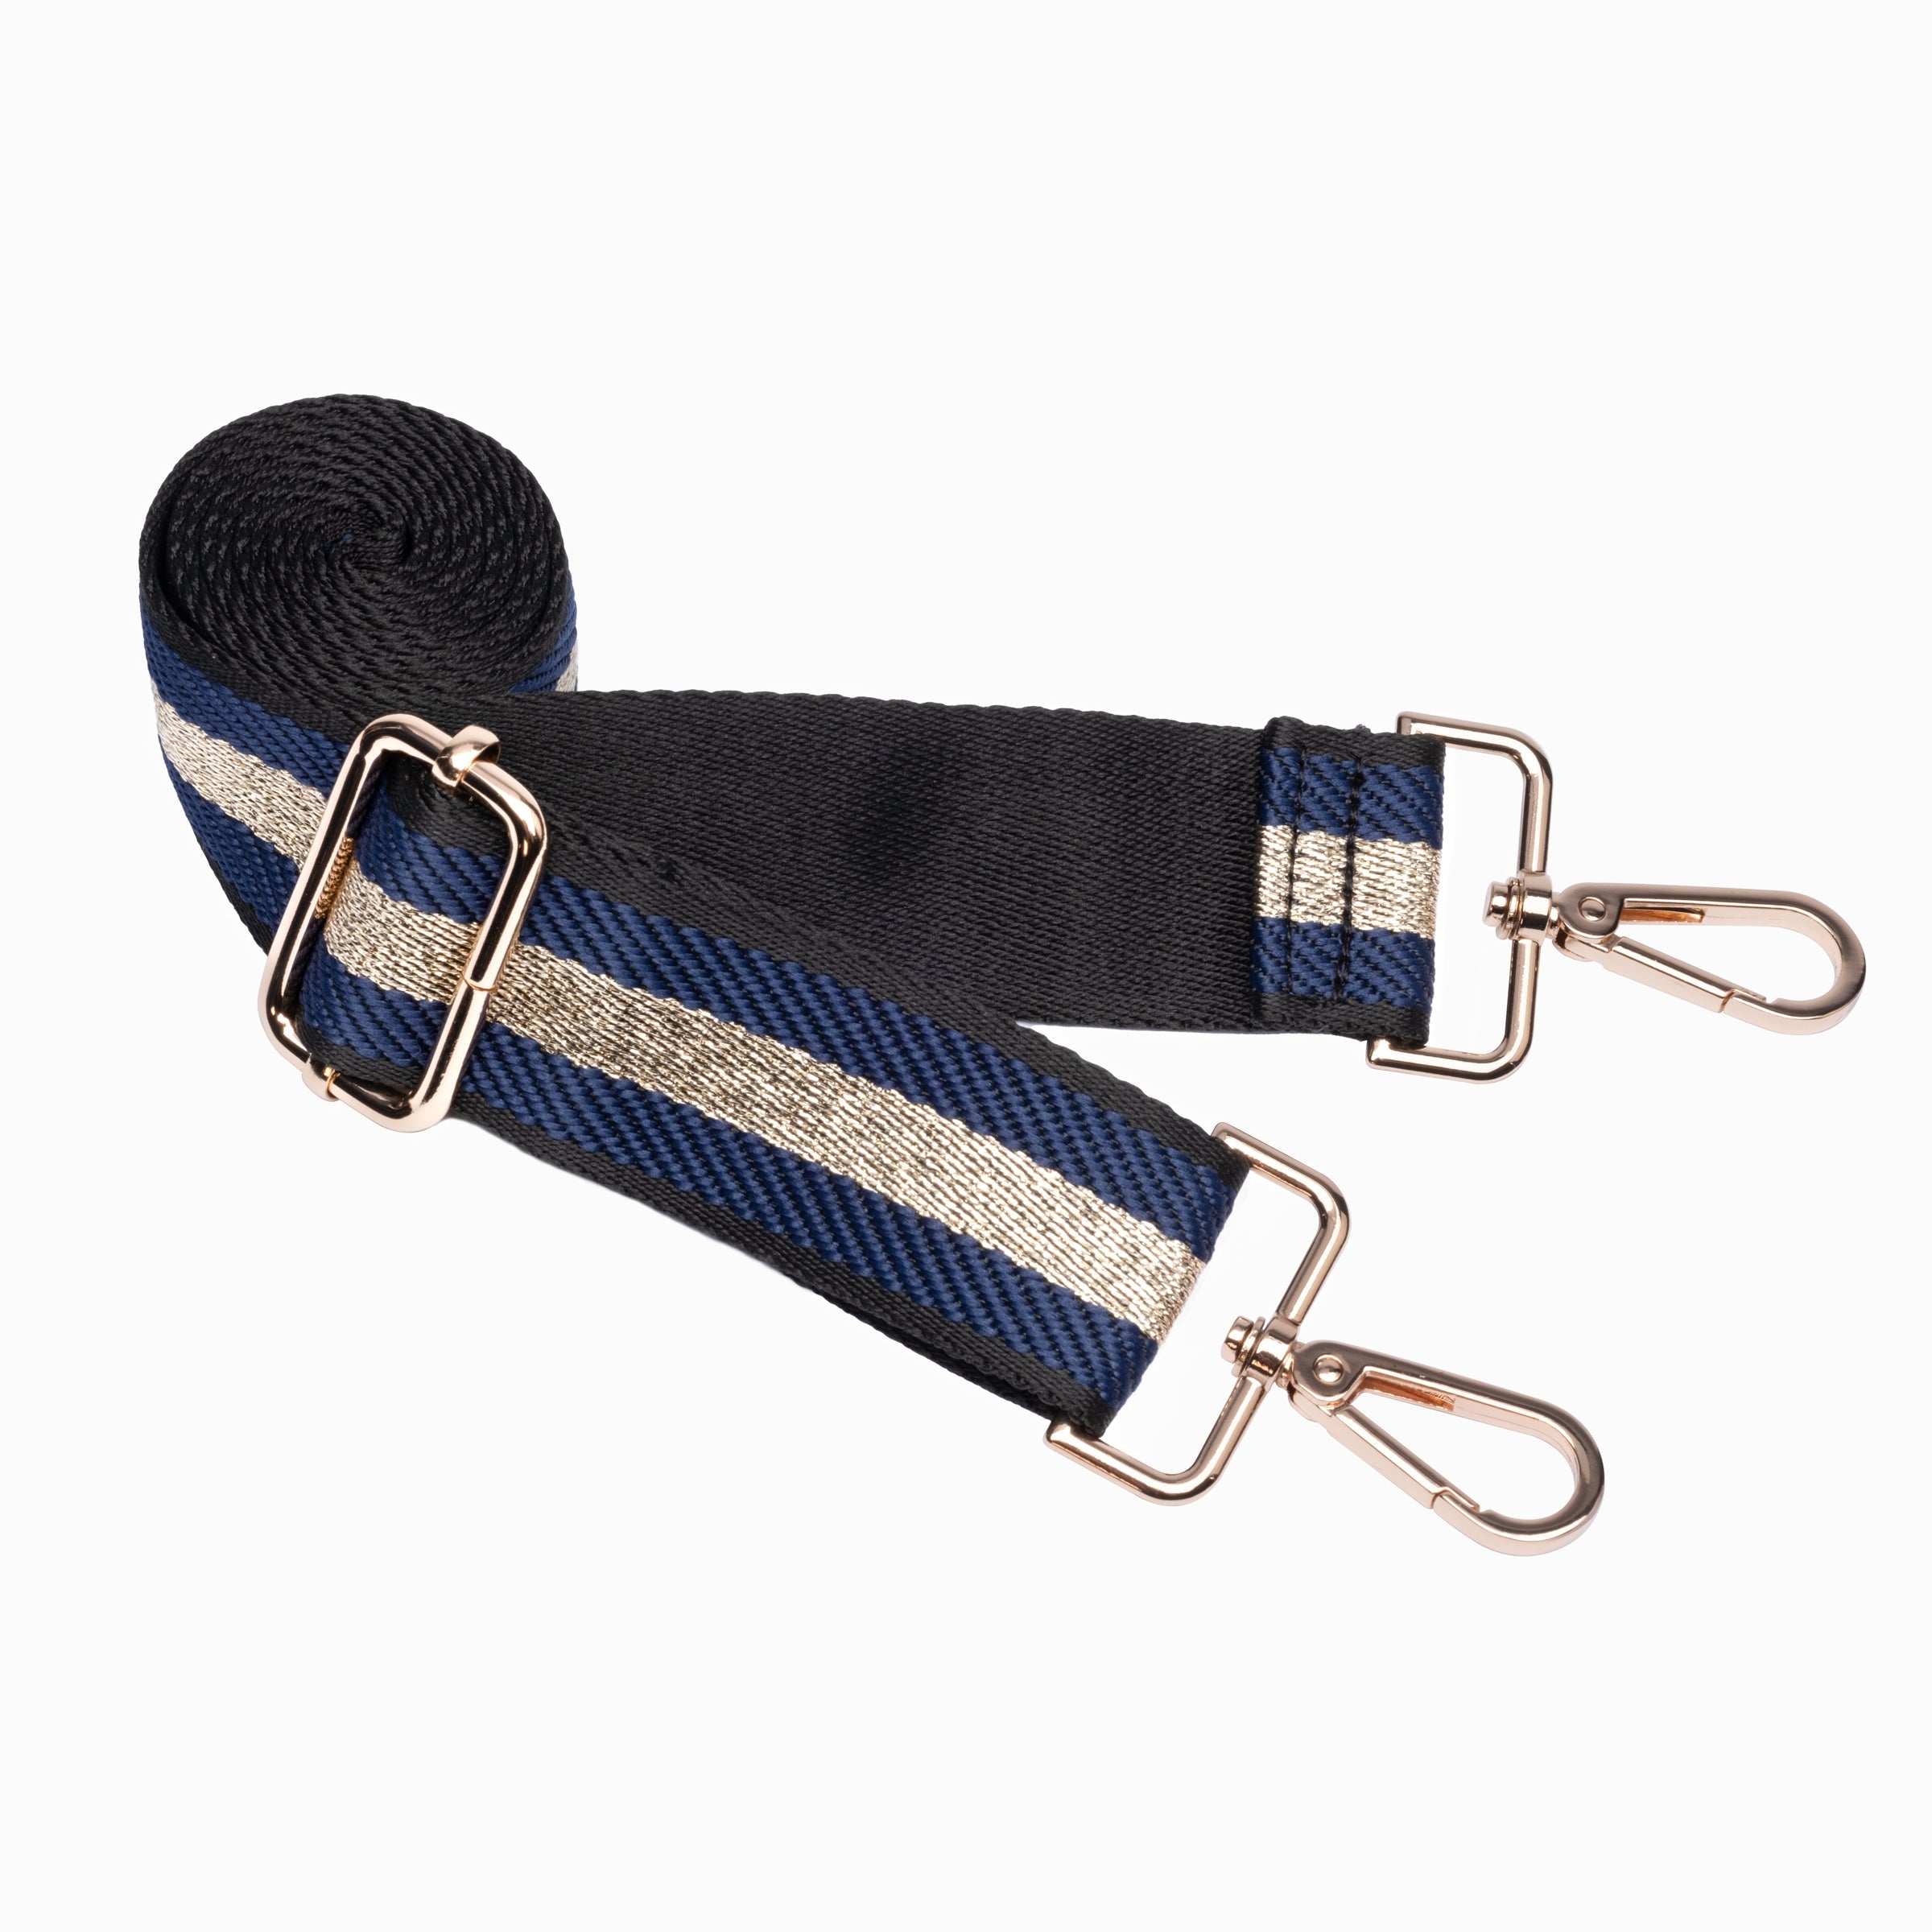 Navy and Gold striped strap